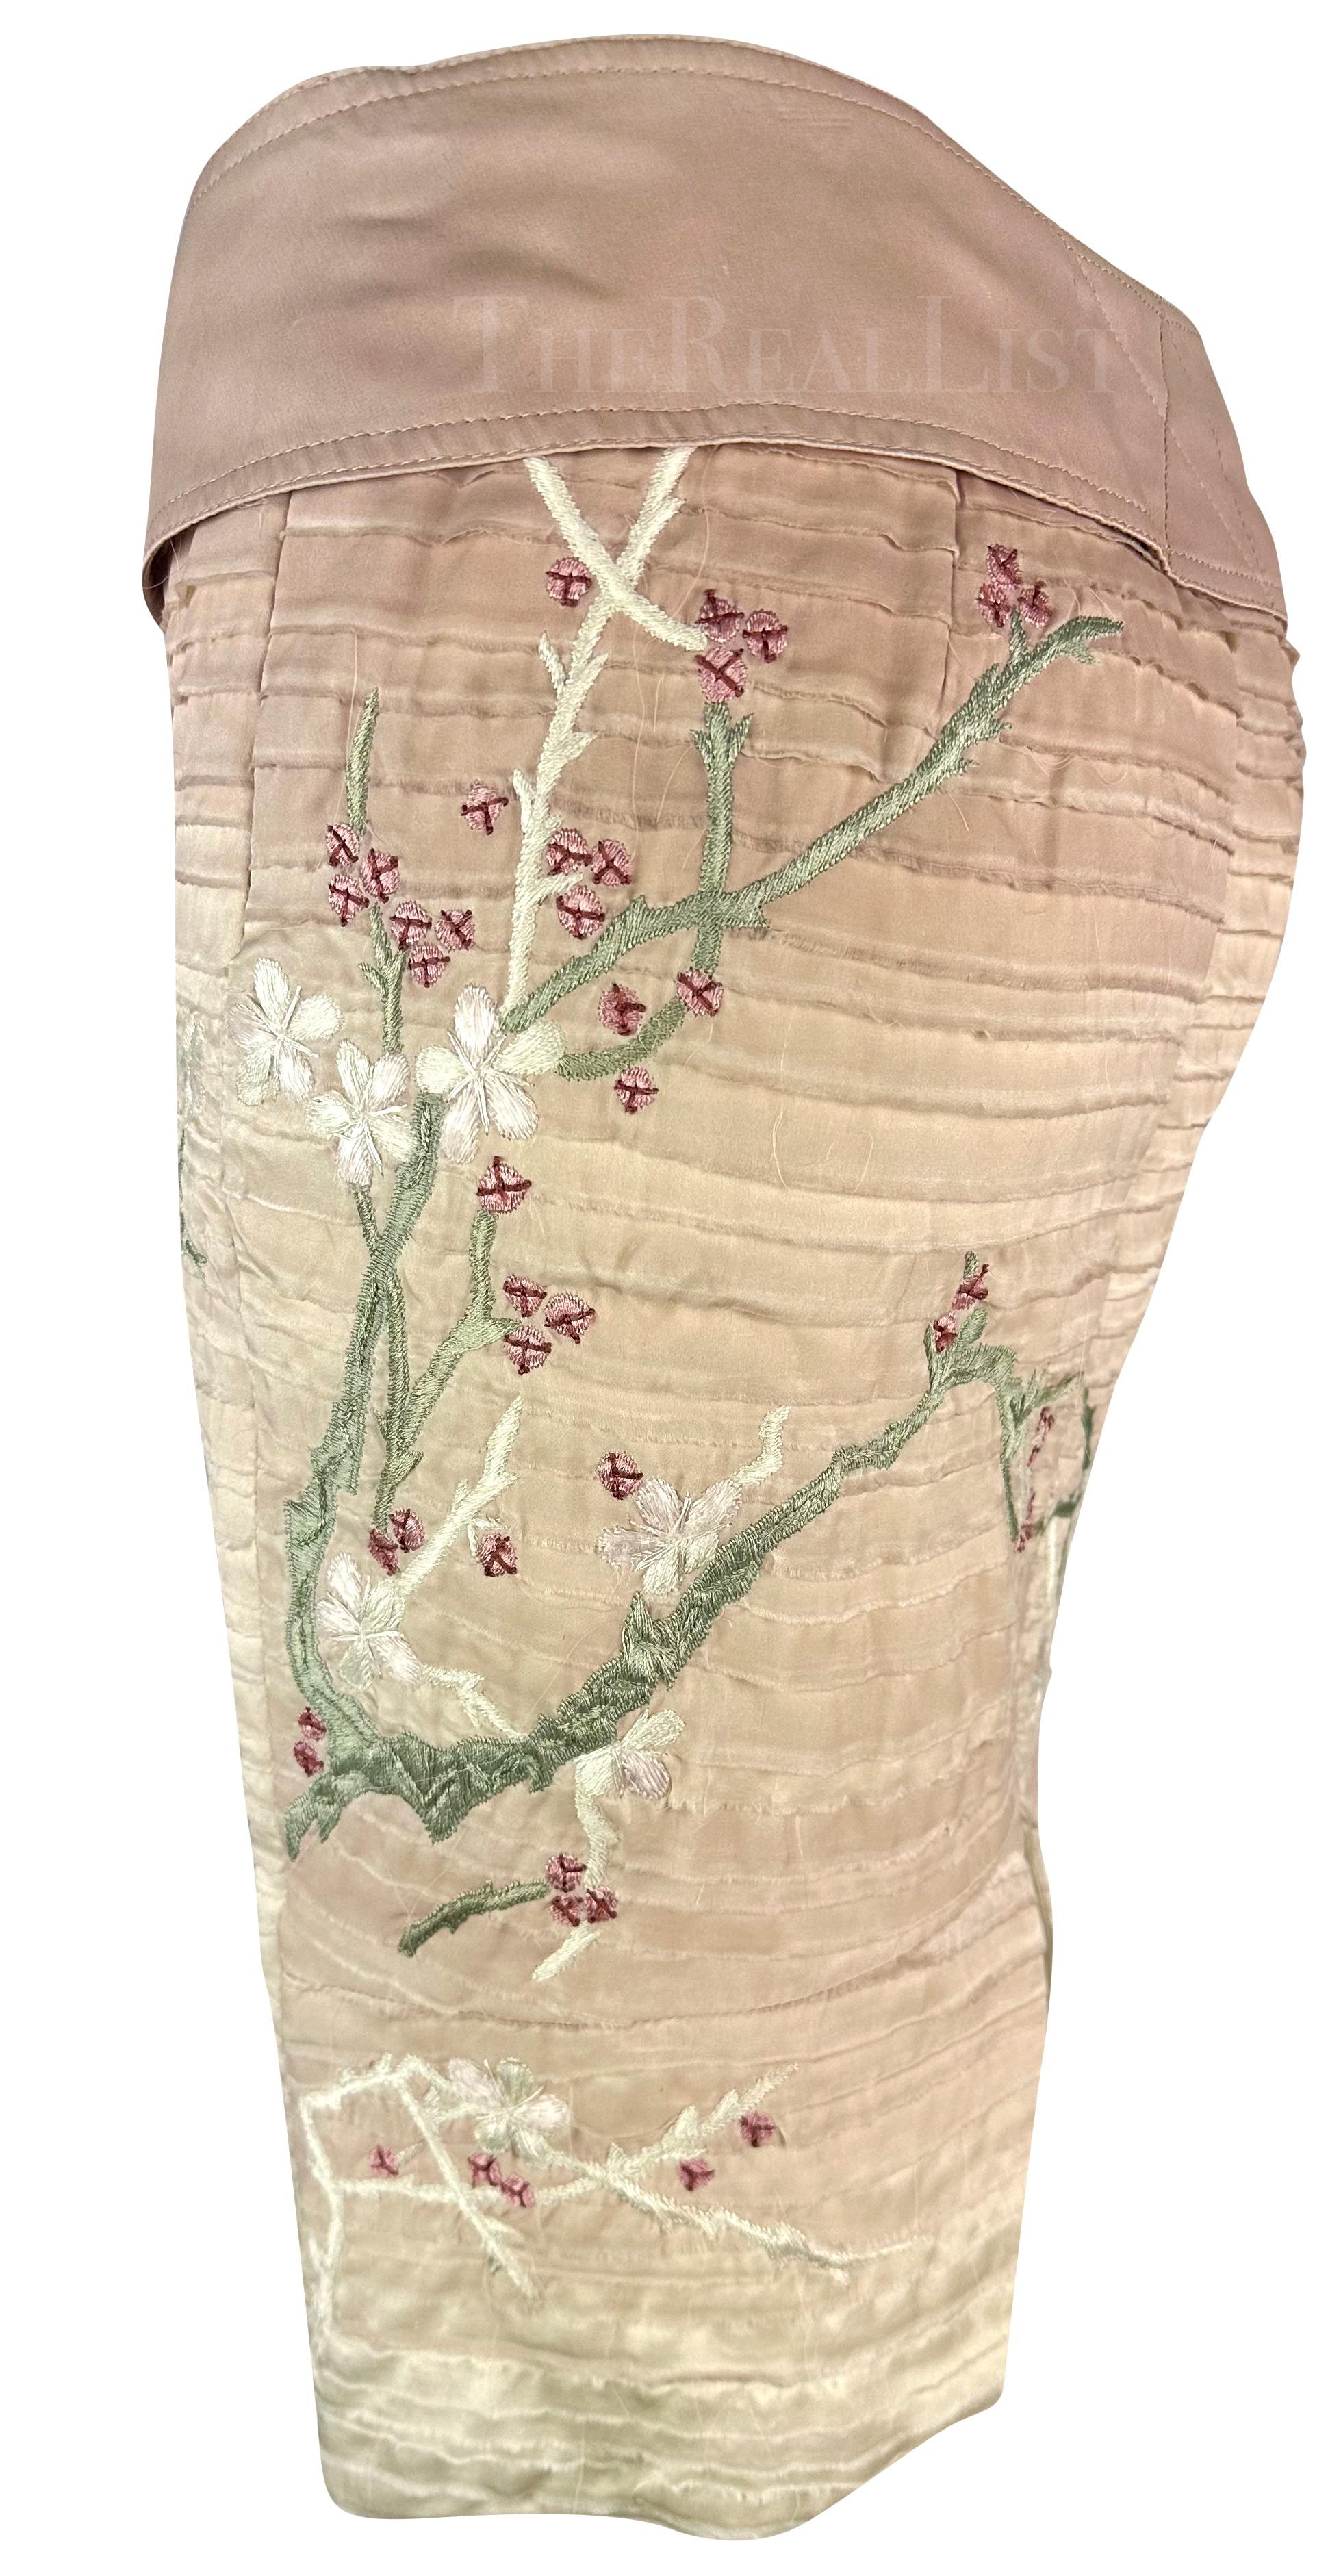 S/S 2003 Gucci by Tom Ford  Light Pink Cherry Blossom Embroidered Mini Skirt For Sale 3